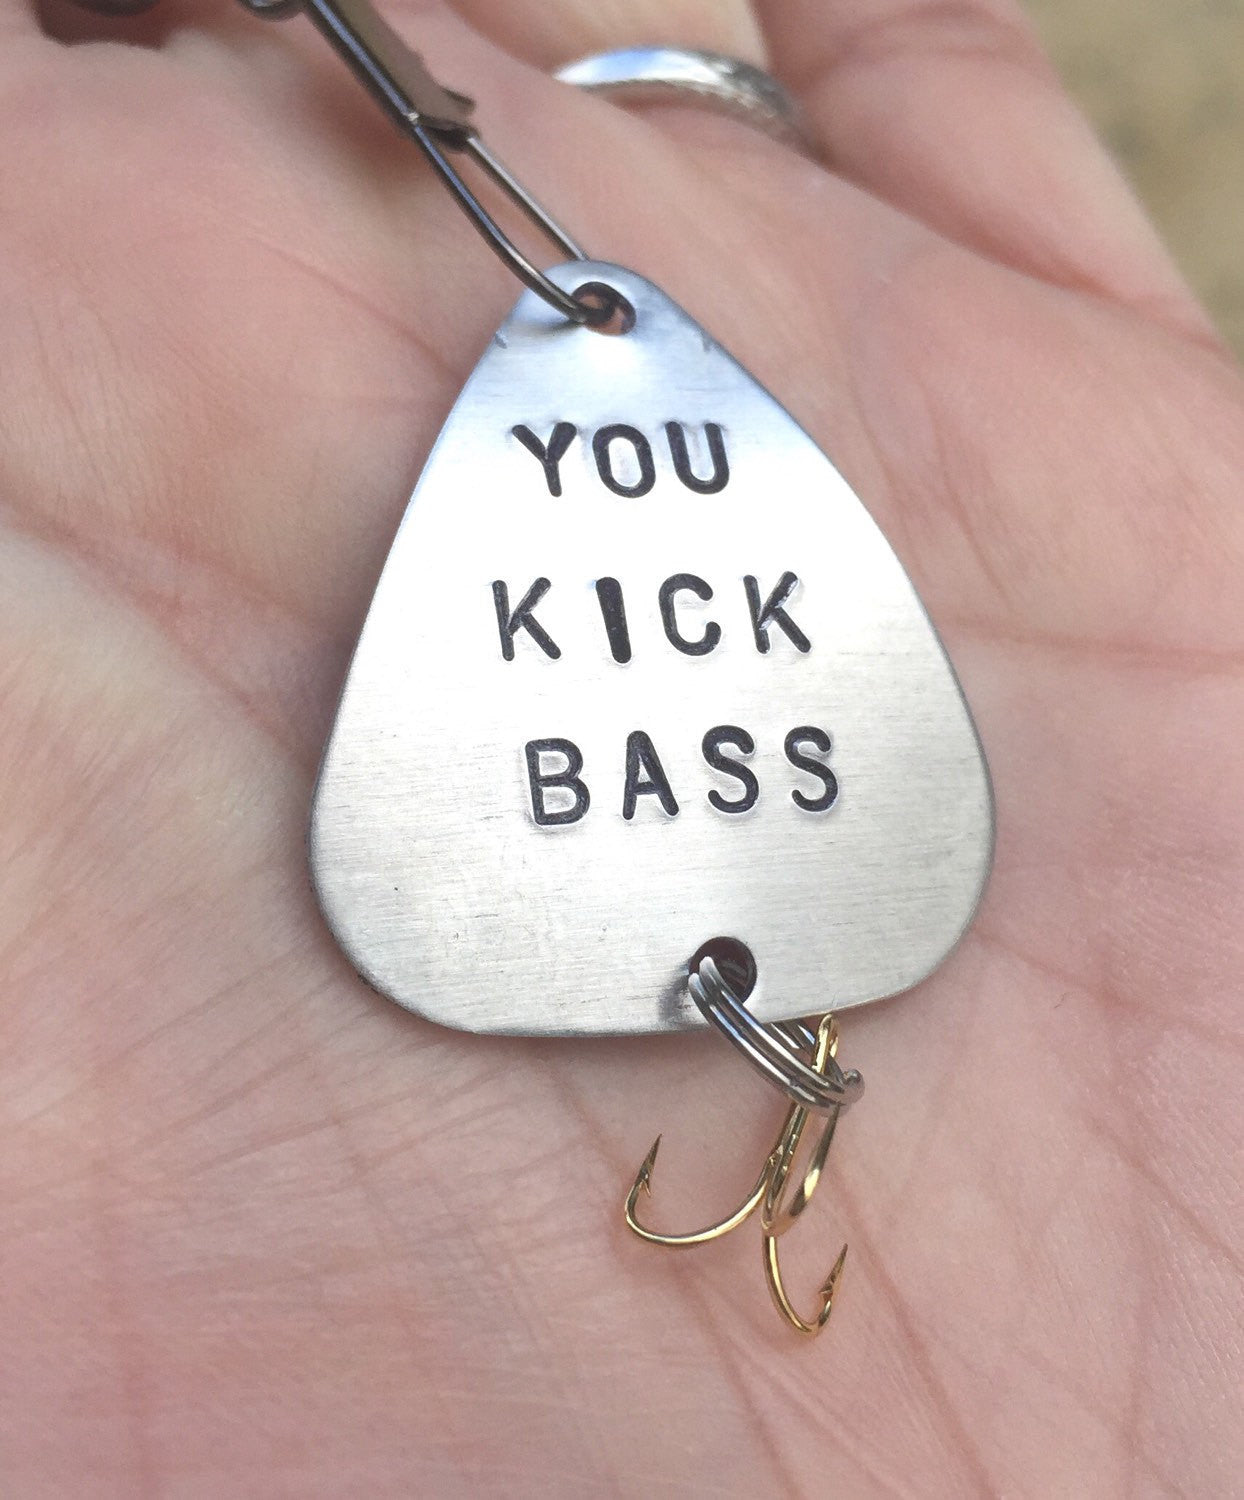 Fishing Lure,Fathers Day Gift, Gift,You Kick Bass, For Him